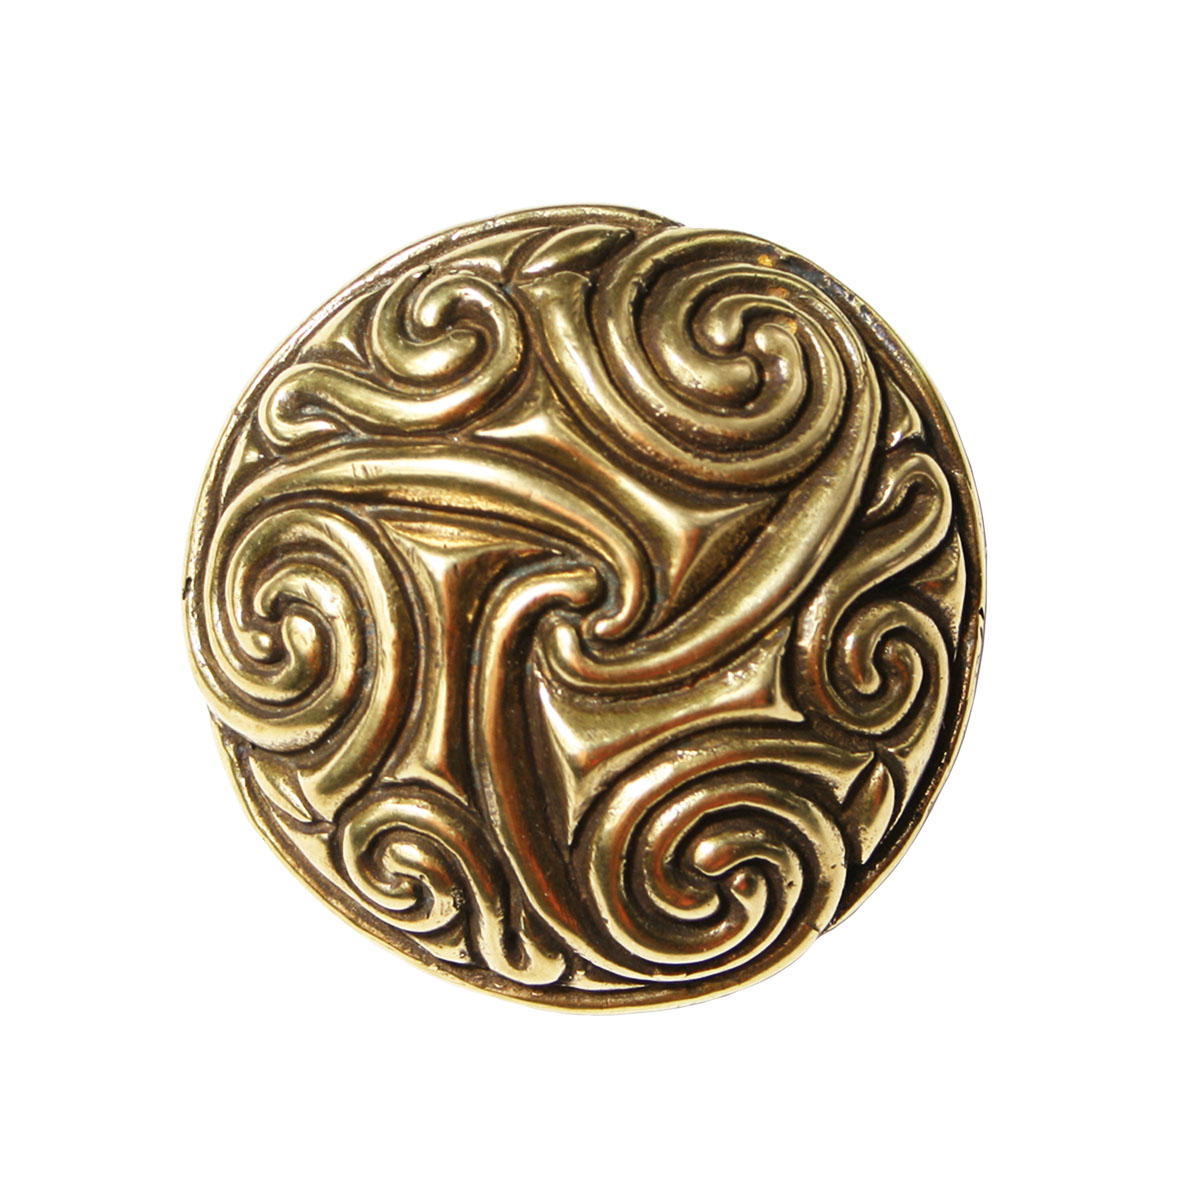 A gold plated Pictish Disc Triskelion Pin Brooch with a swirl design.